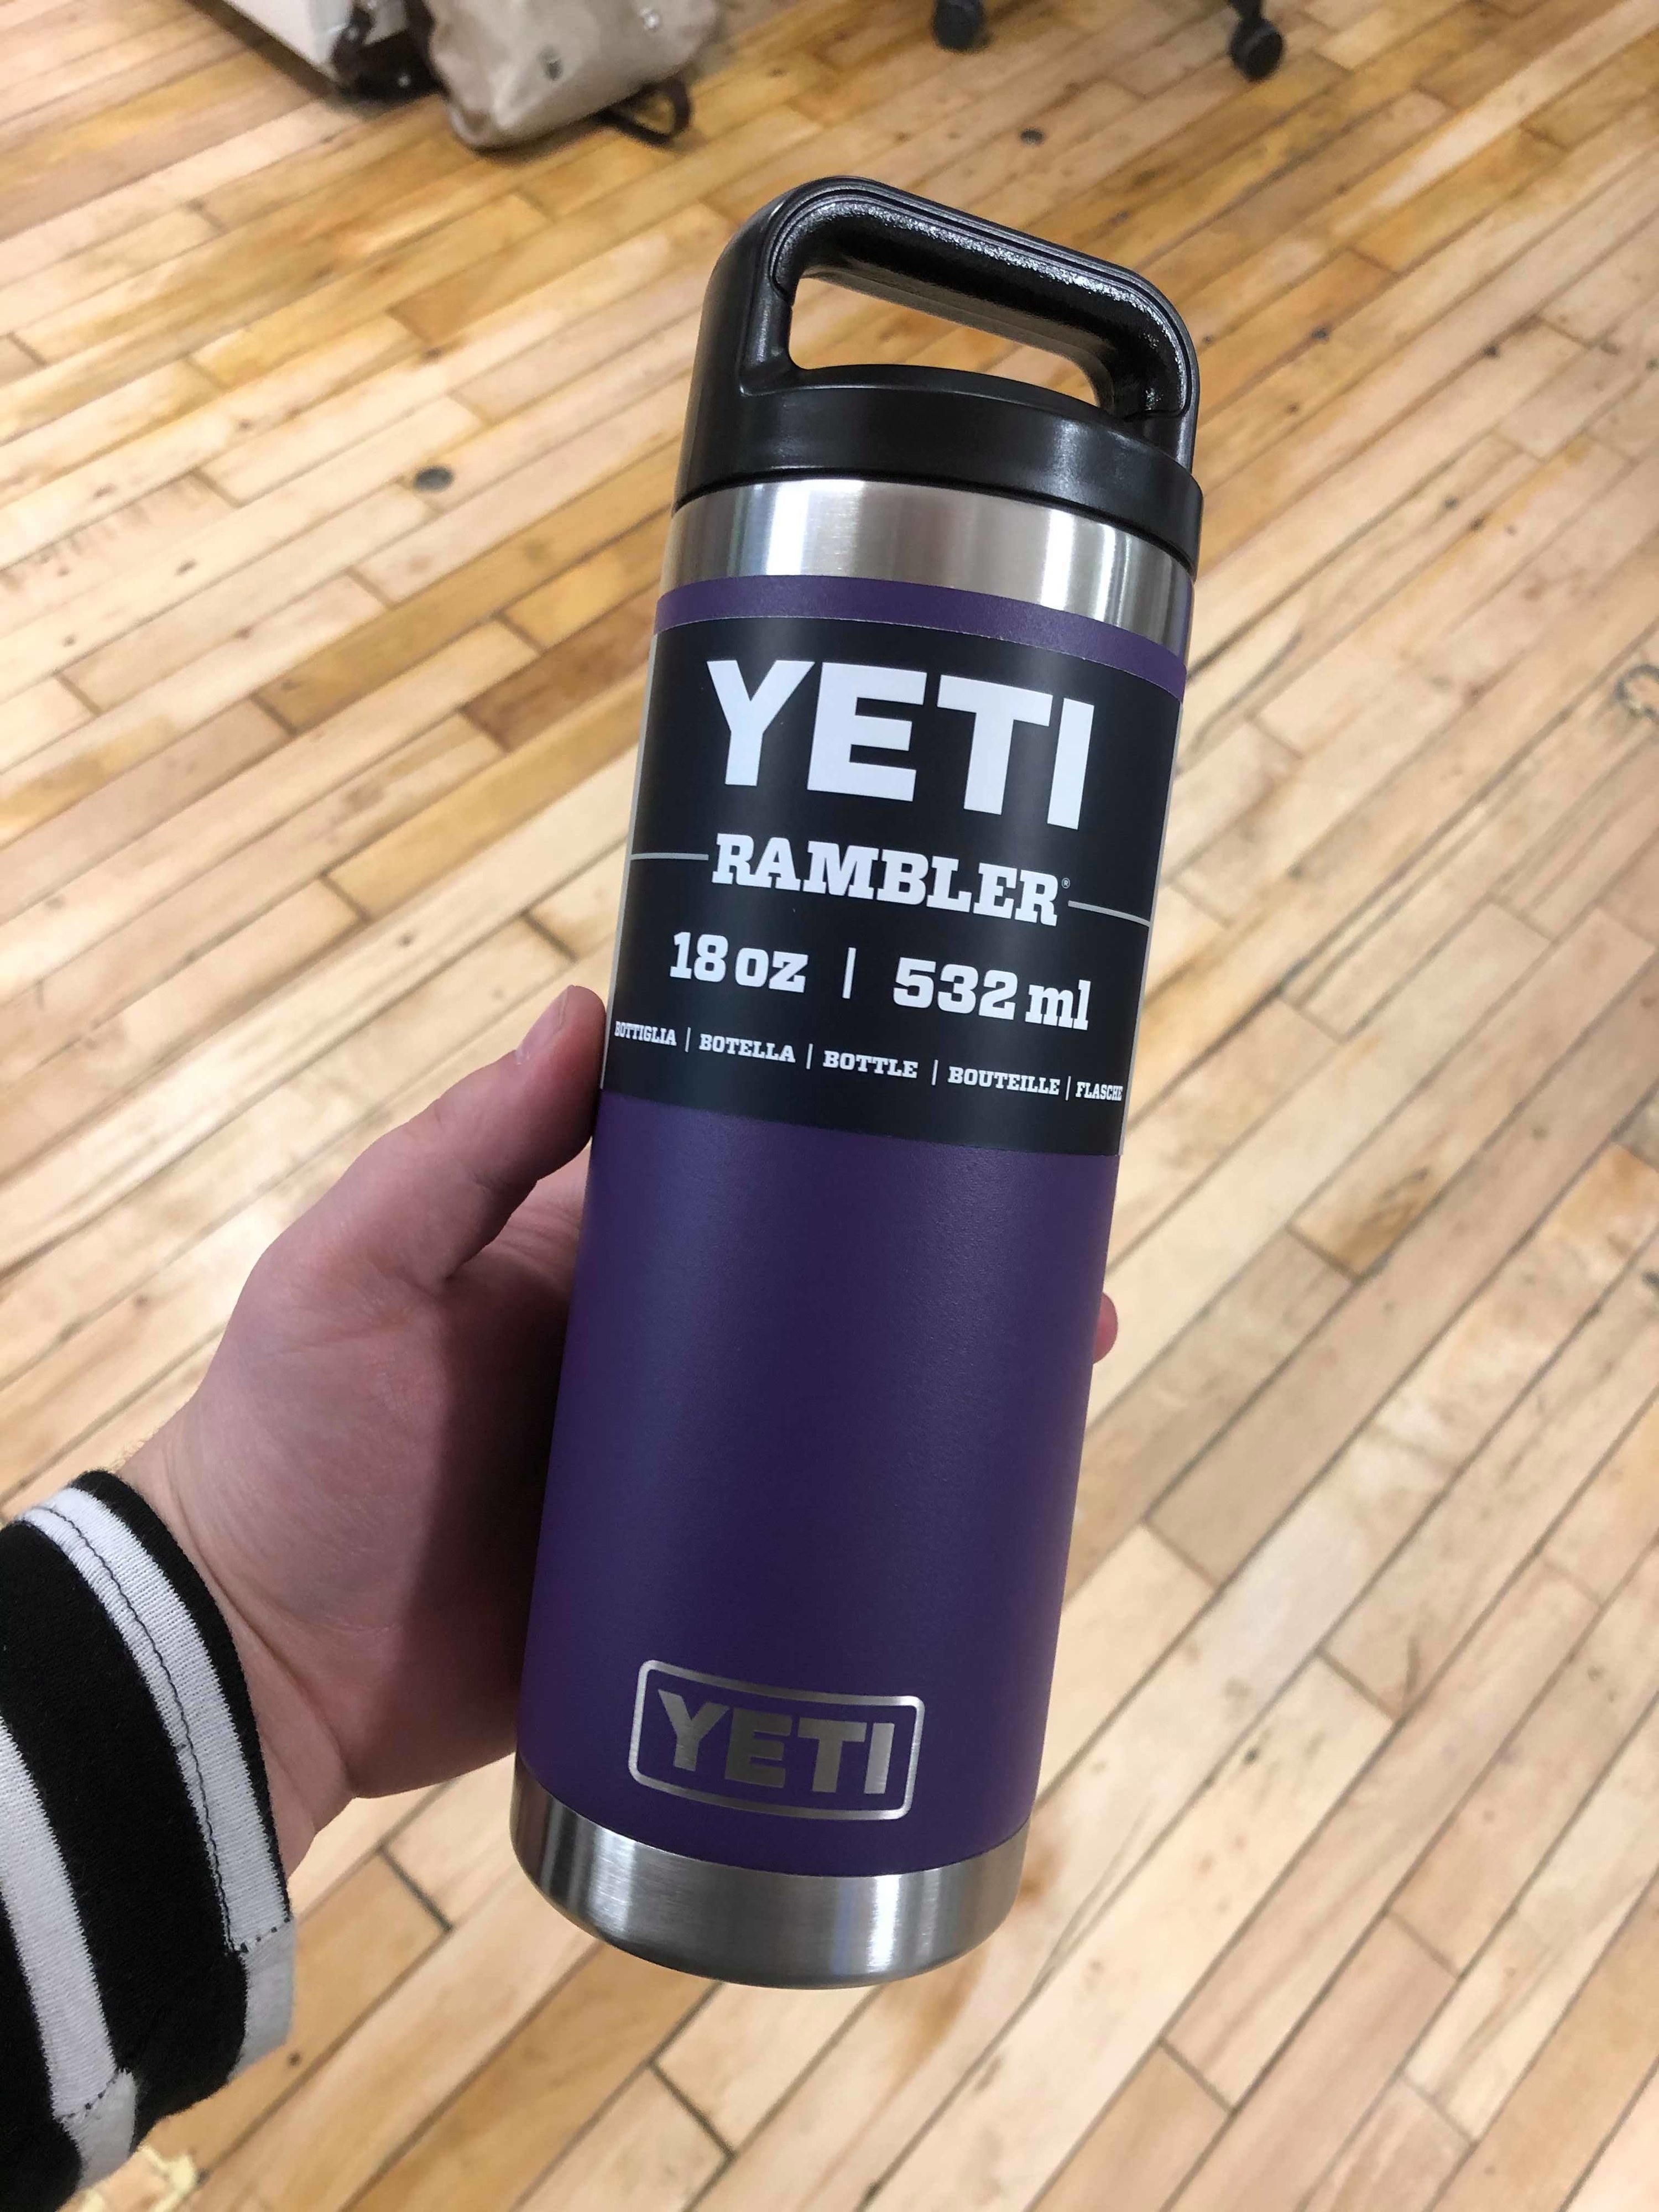 A person holding the Yeti mug over a hardwood floor